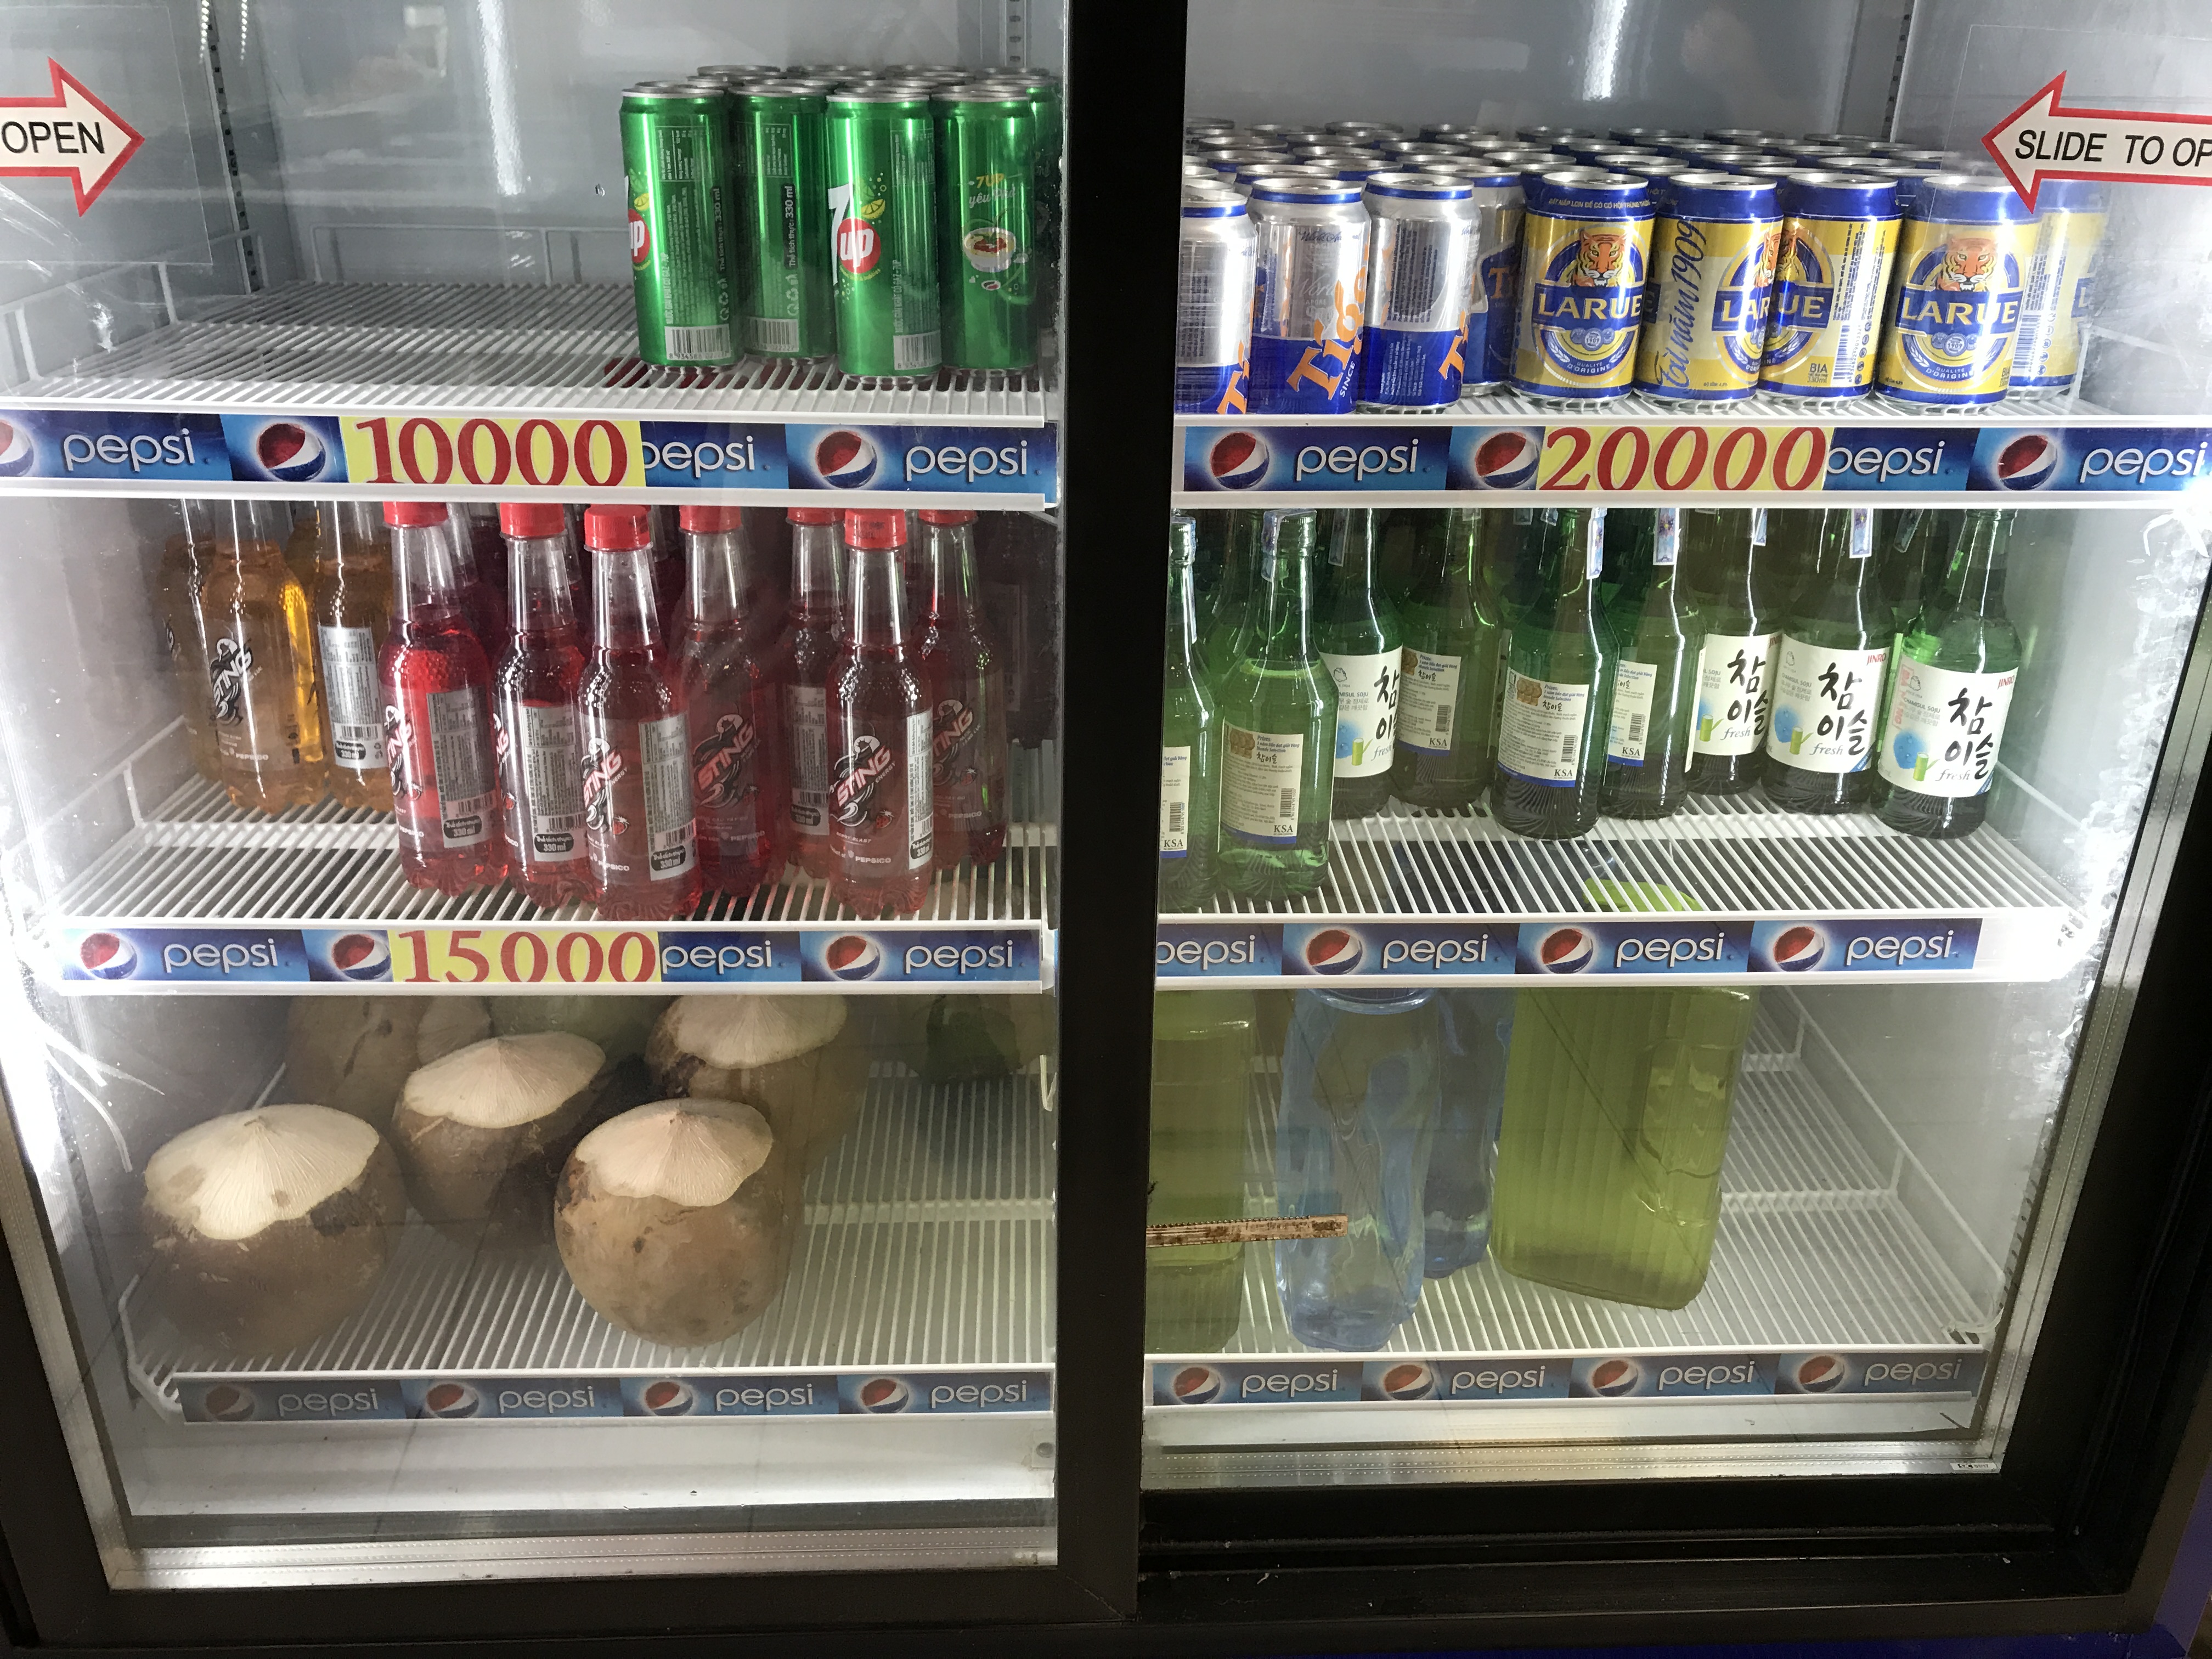 Refrigerator at a restaurant in Vietnam. It holds 7up, Sting energy drink, beer, and coconuts.